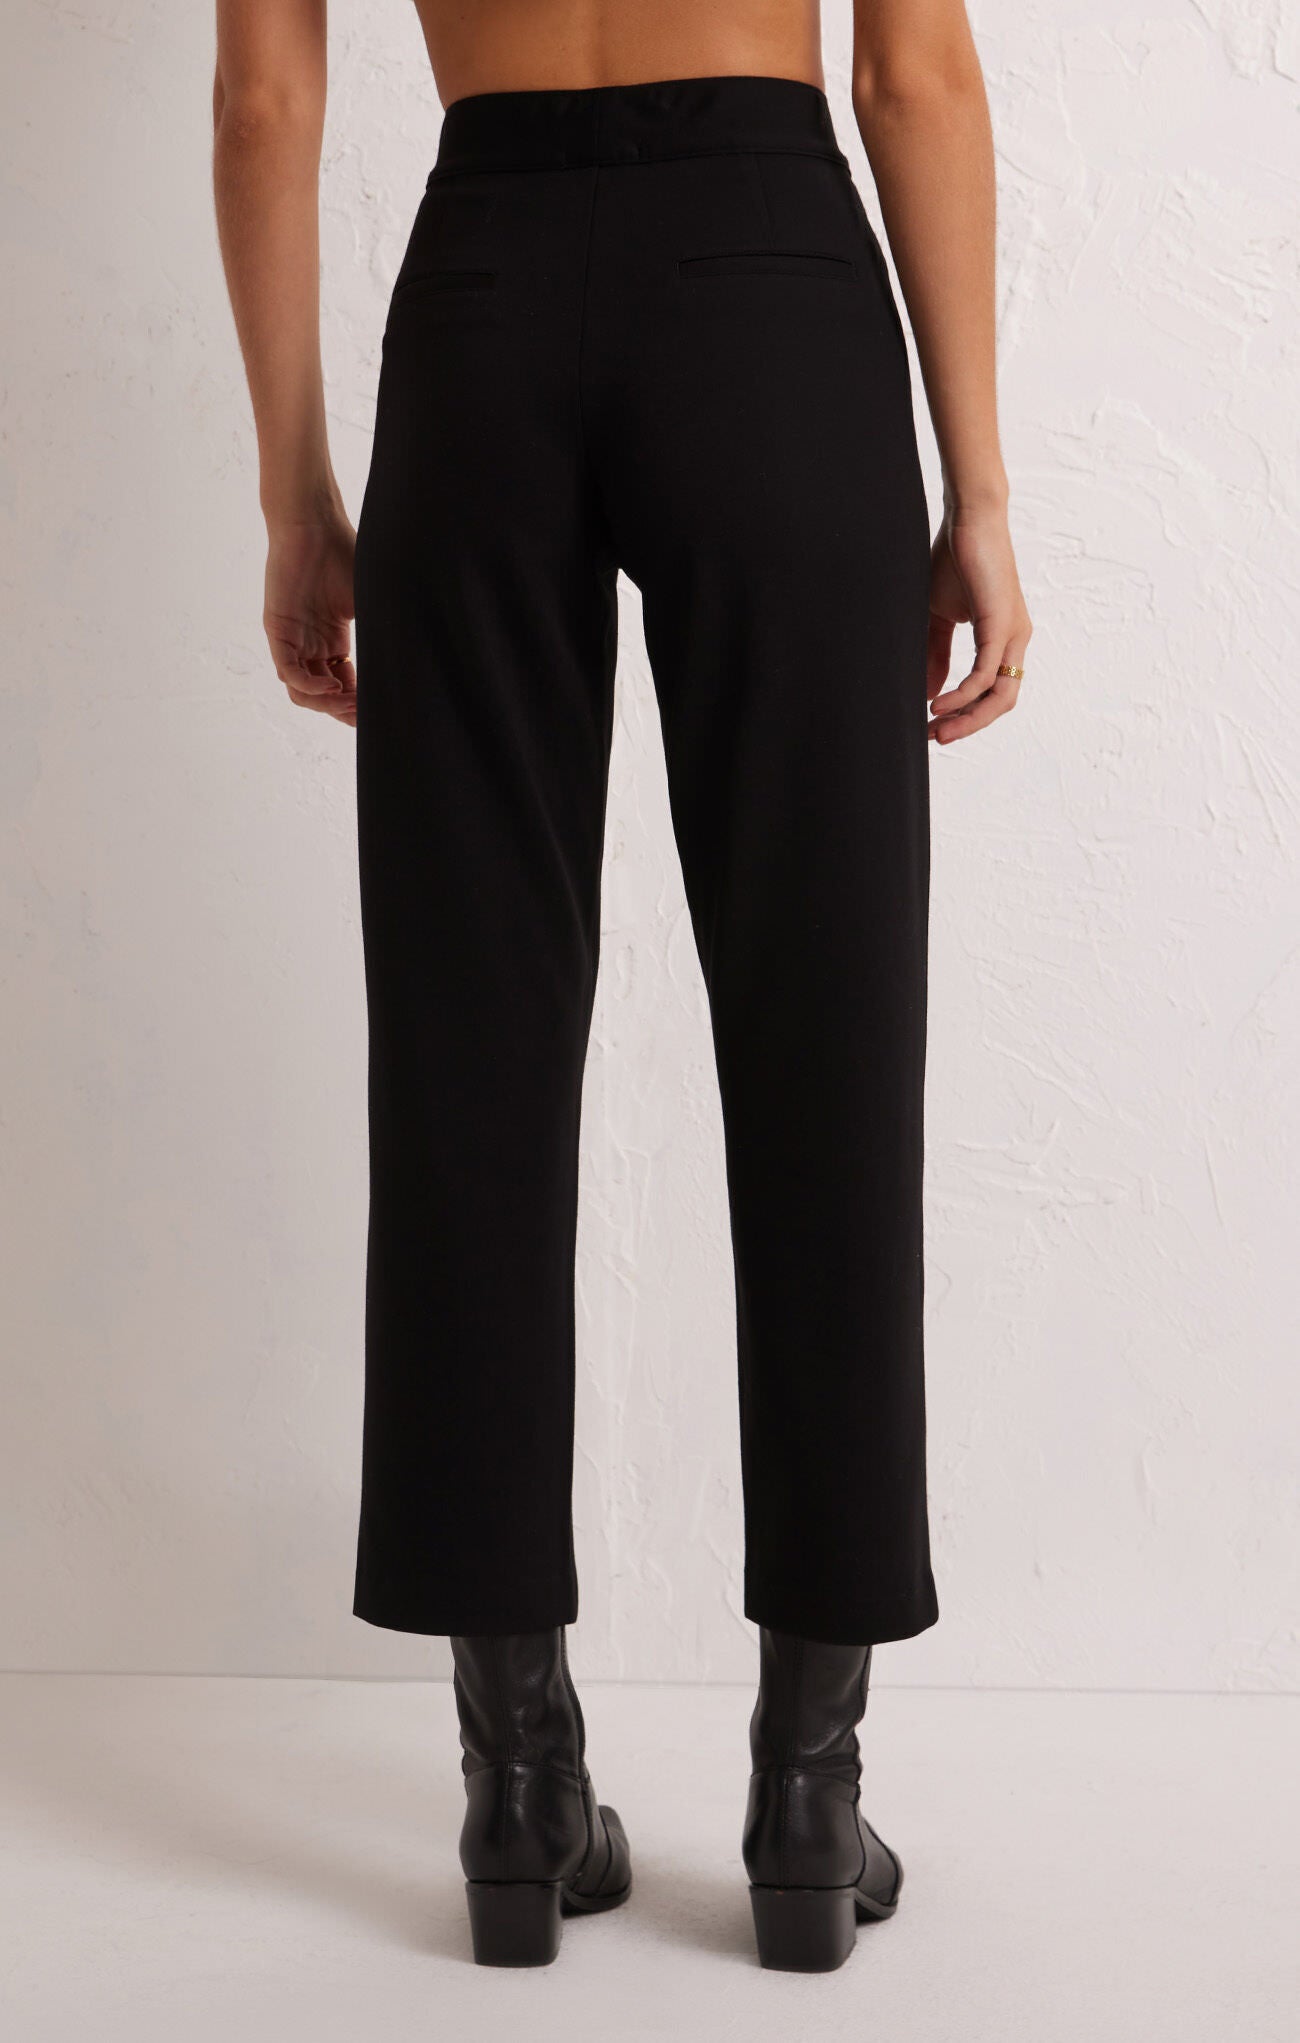 Z Supply Homebound Pointelle Pant